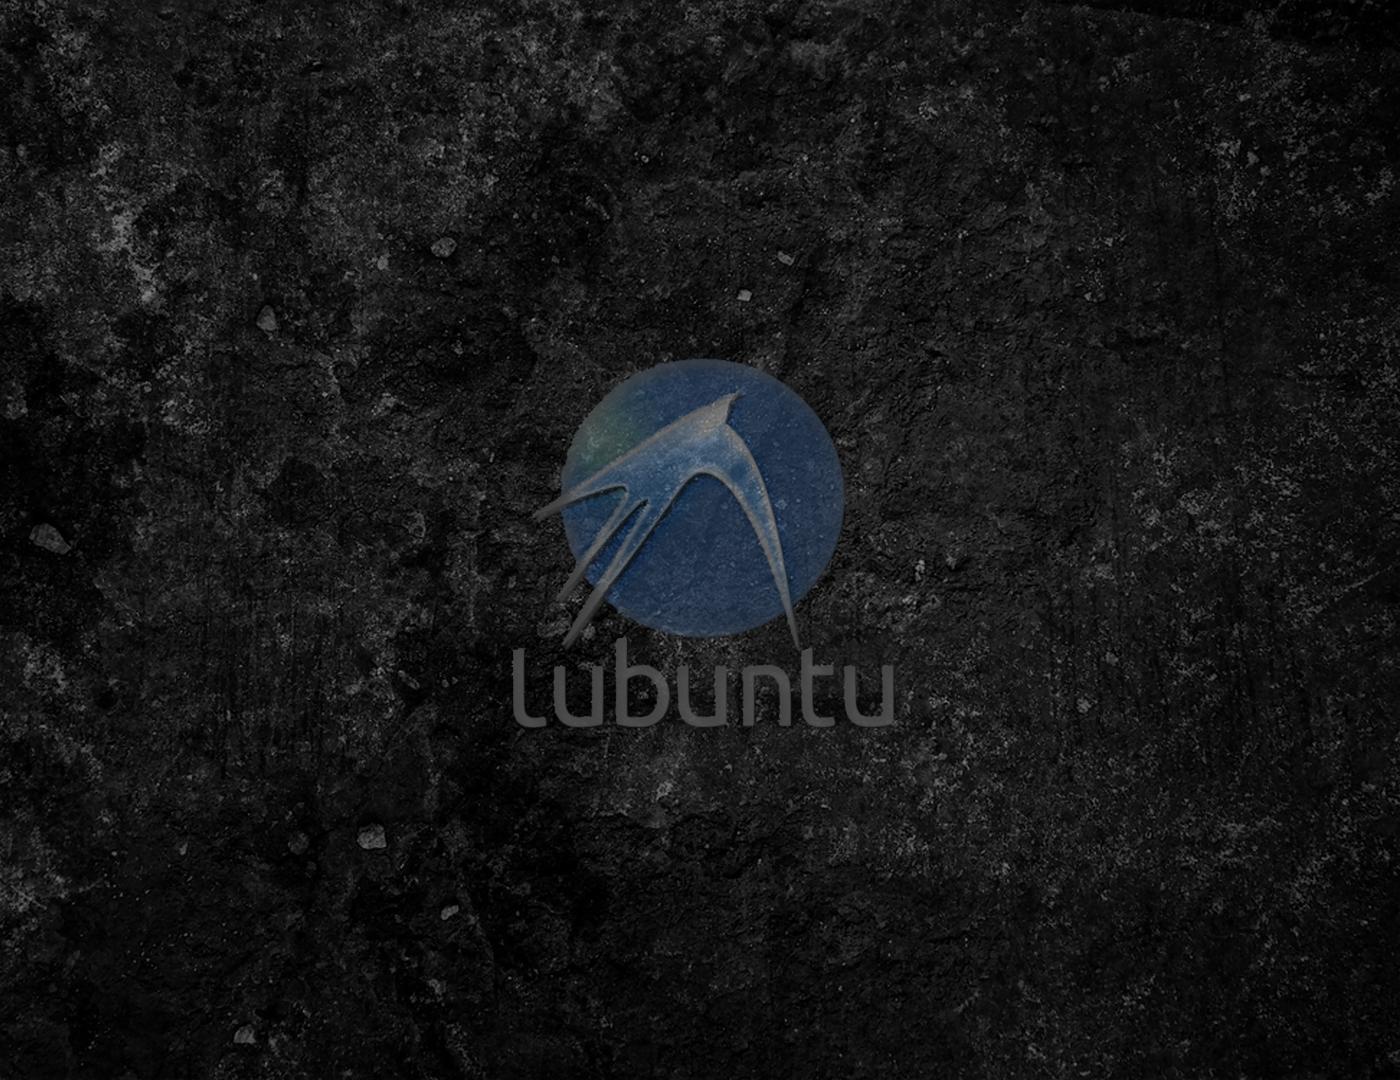 Thanks for helping me out when I needed, Lubuntu. Have a wallpapers